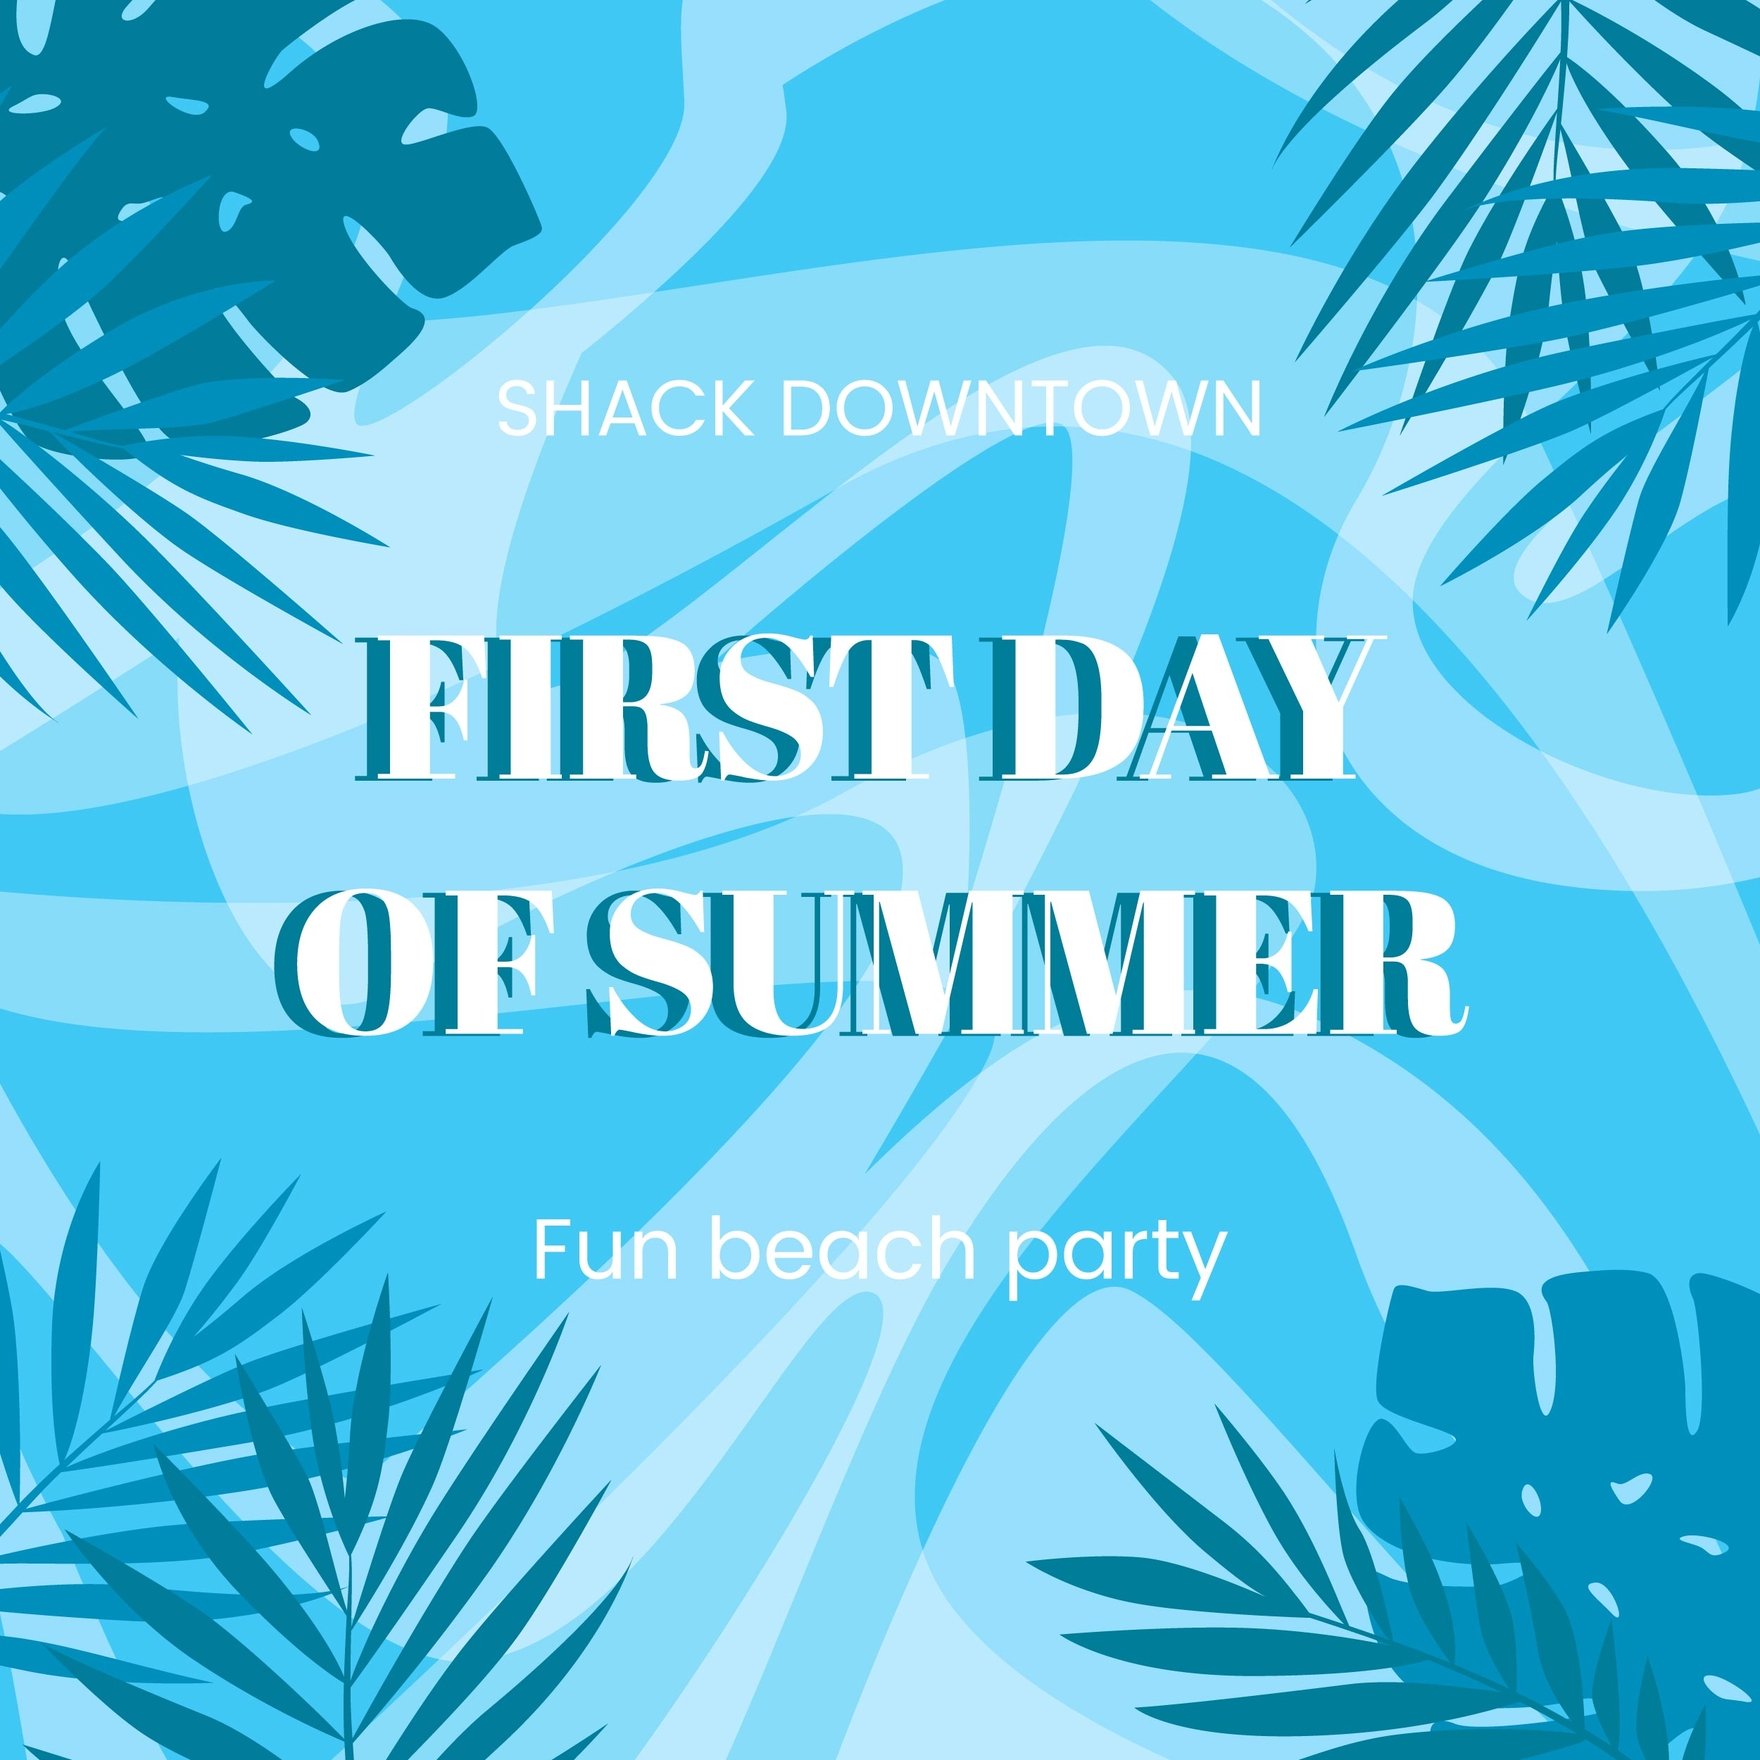 Free First Day of Summer Whatsapp Post in Illustrator, PSD, EPS, SVG, PNG, JPEG